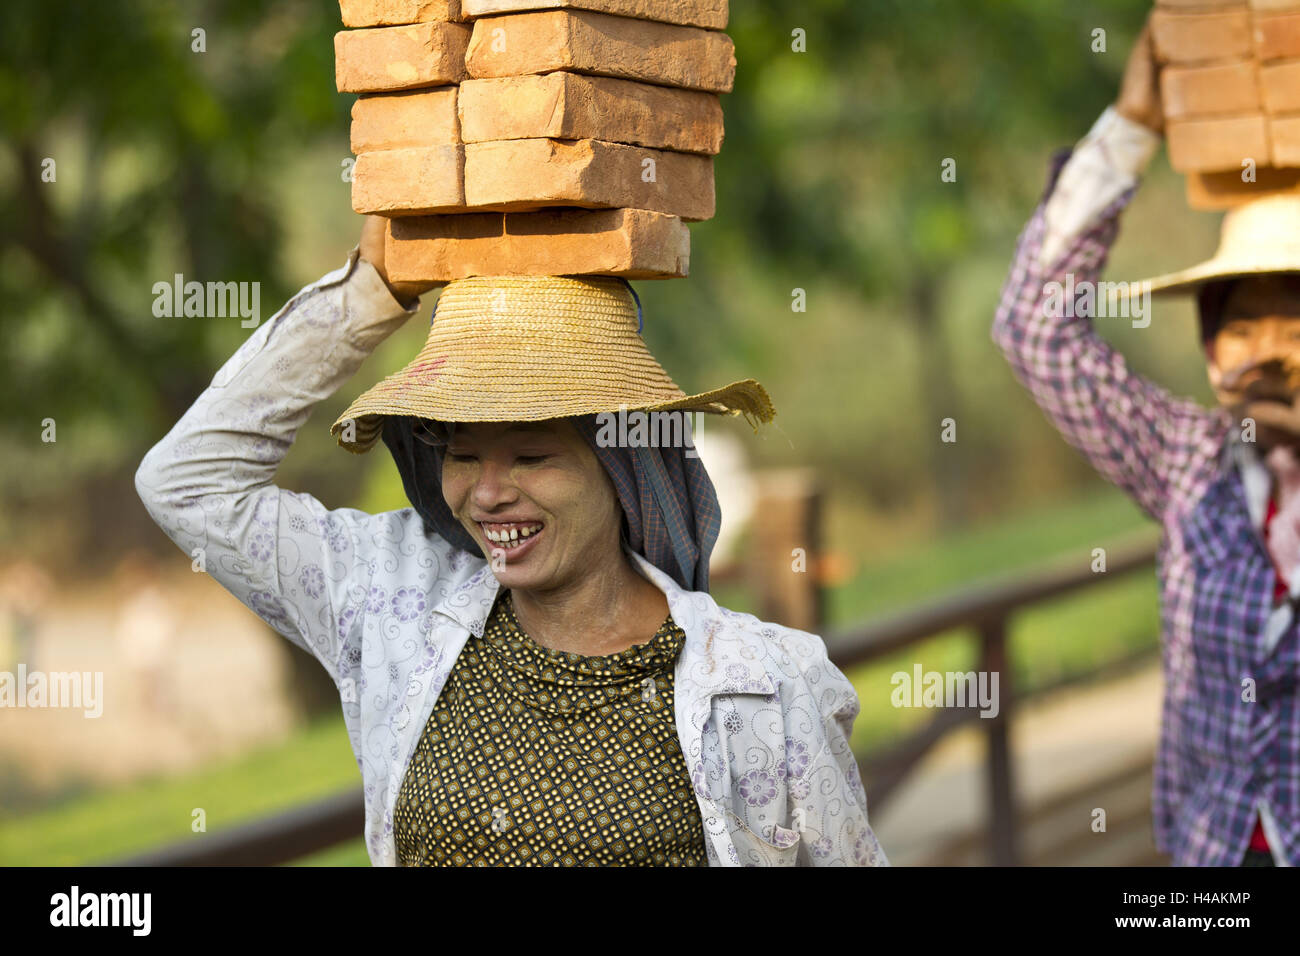 Myanmar, city of Bagan, women carry clay brick on the head, Stock Photo